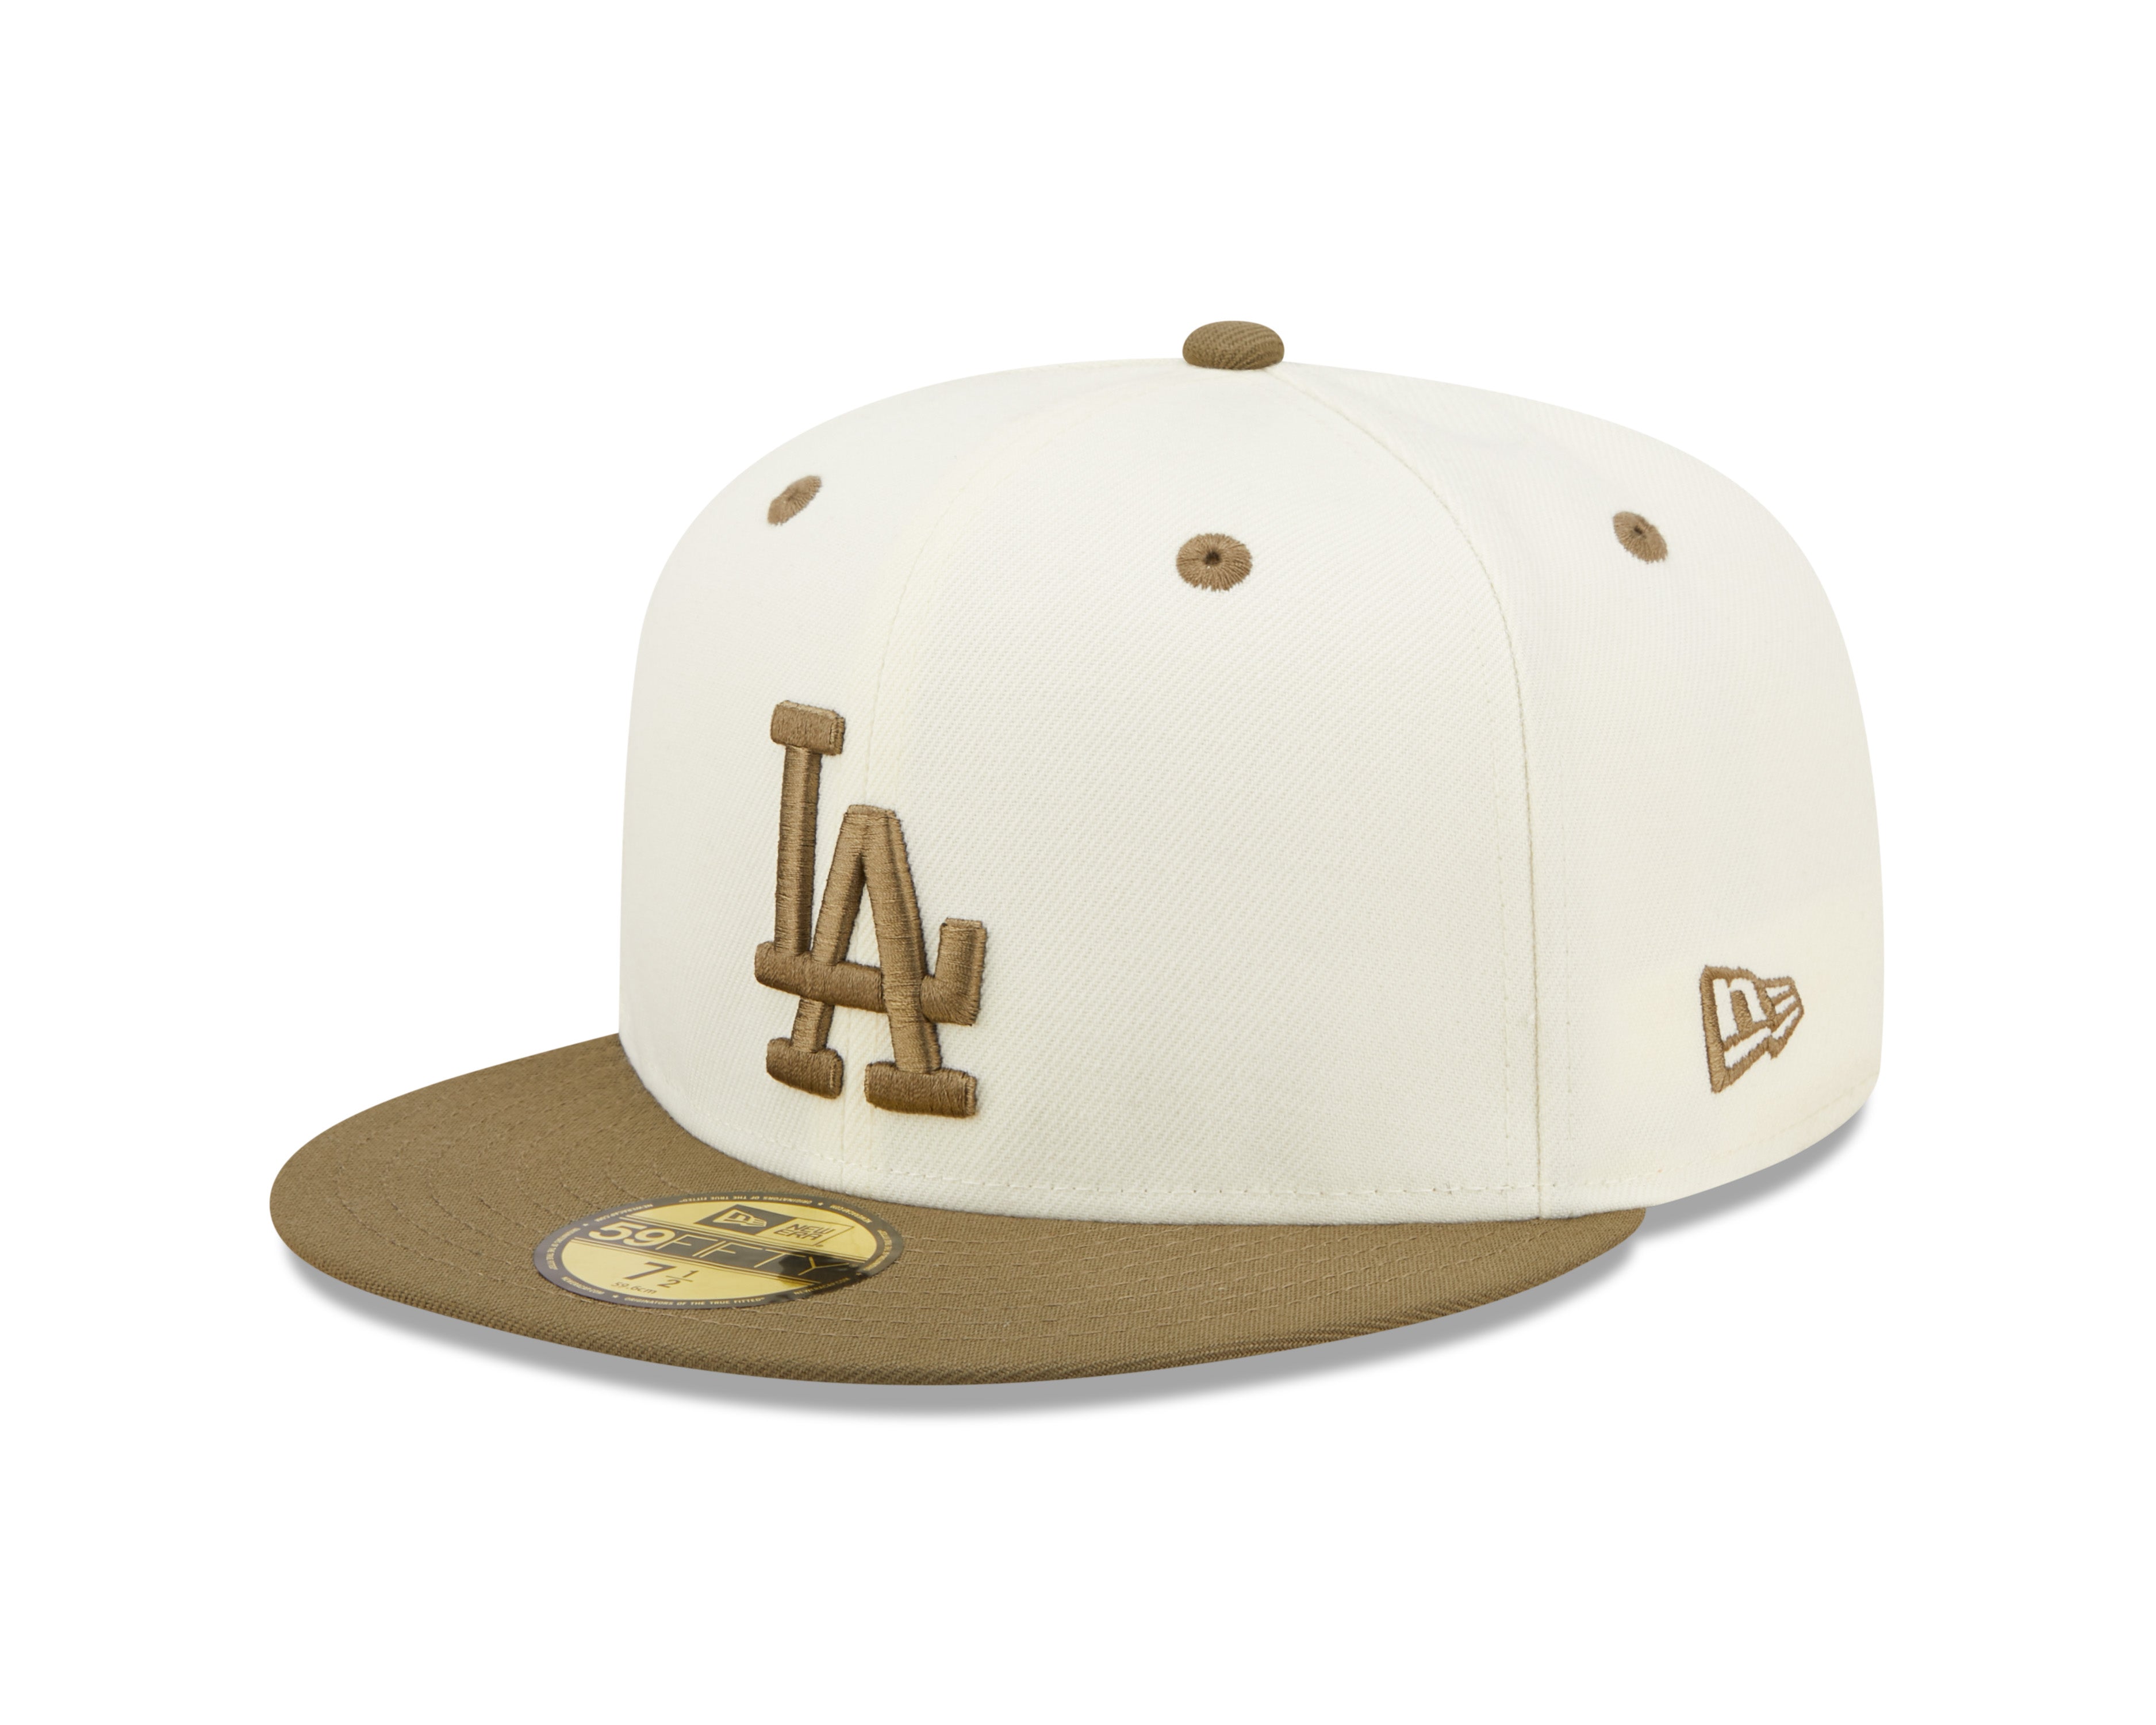 Los Angeles Dodgers WS Trail Mix 59Fifty Fitted Cap - Chrome White - Headz Up 